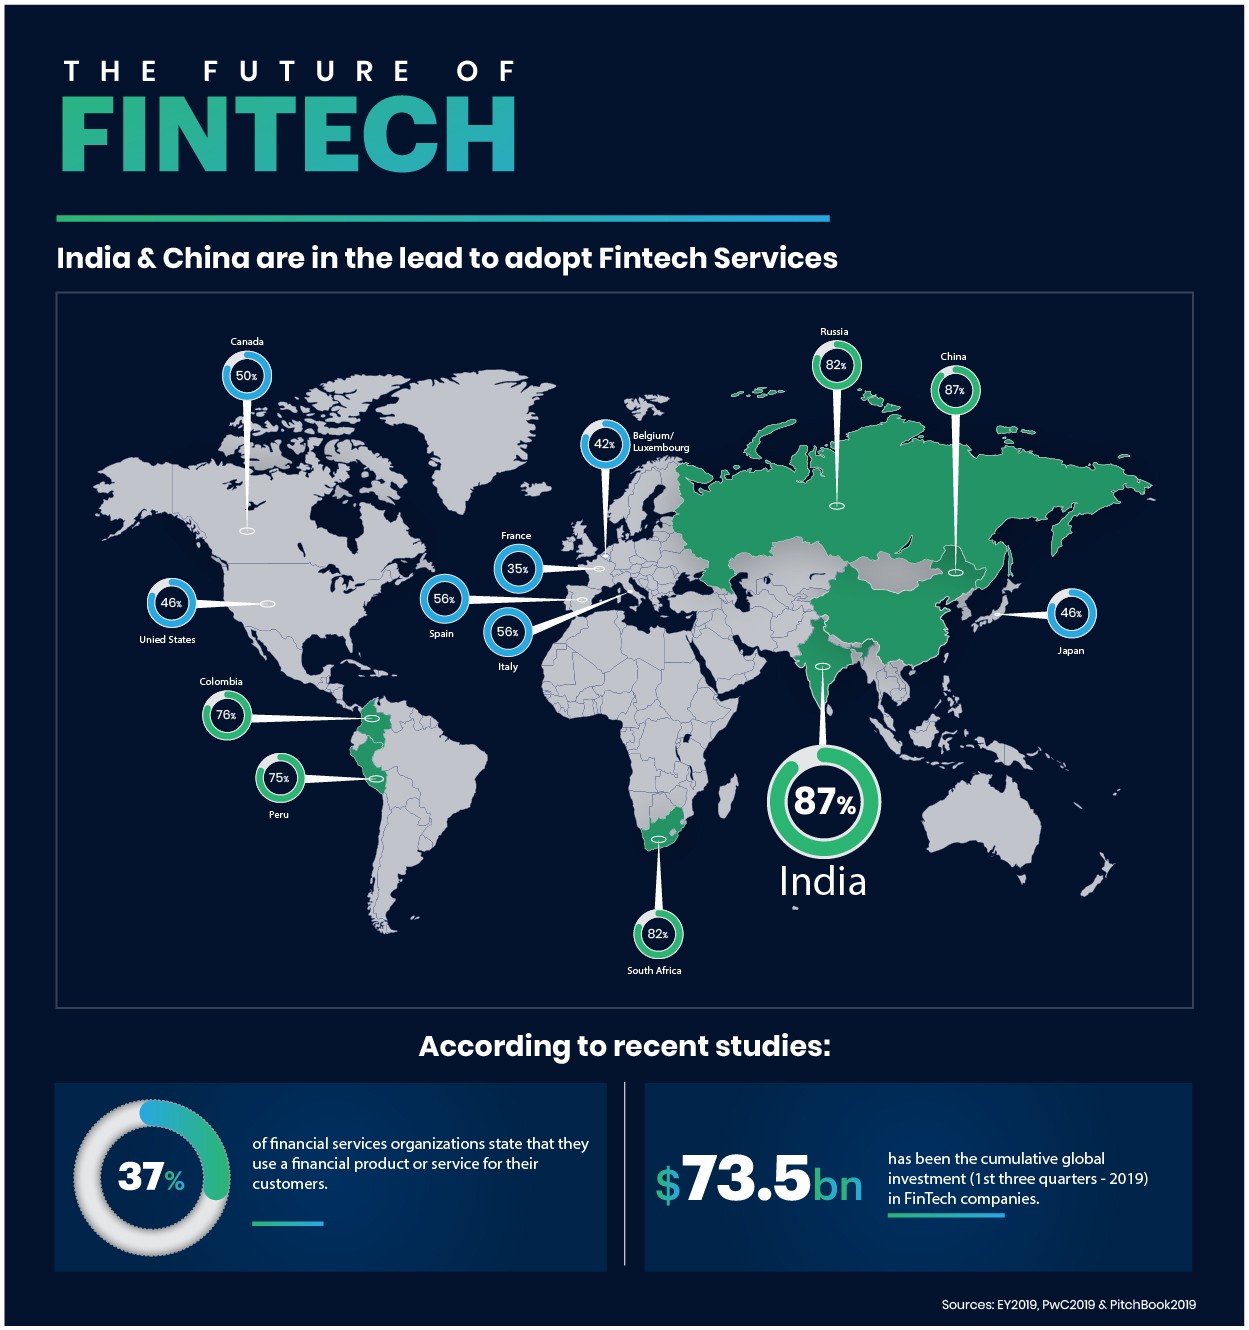 THE FINTECH WORLD: FUTURE LOOKS PROMISING FOR THOSE WHO THRIVE WITH DIGITAL TRANSFORMATIONS